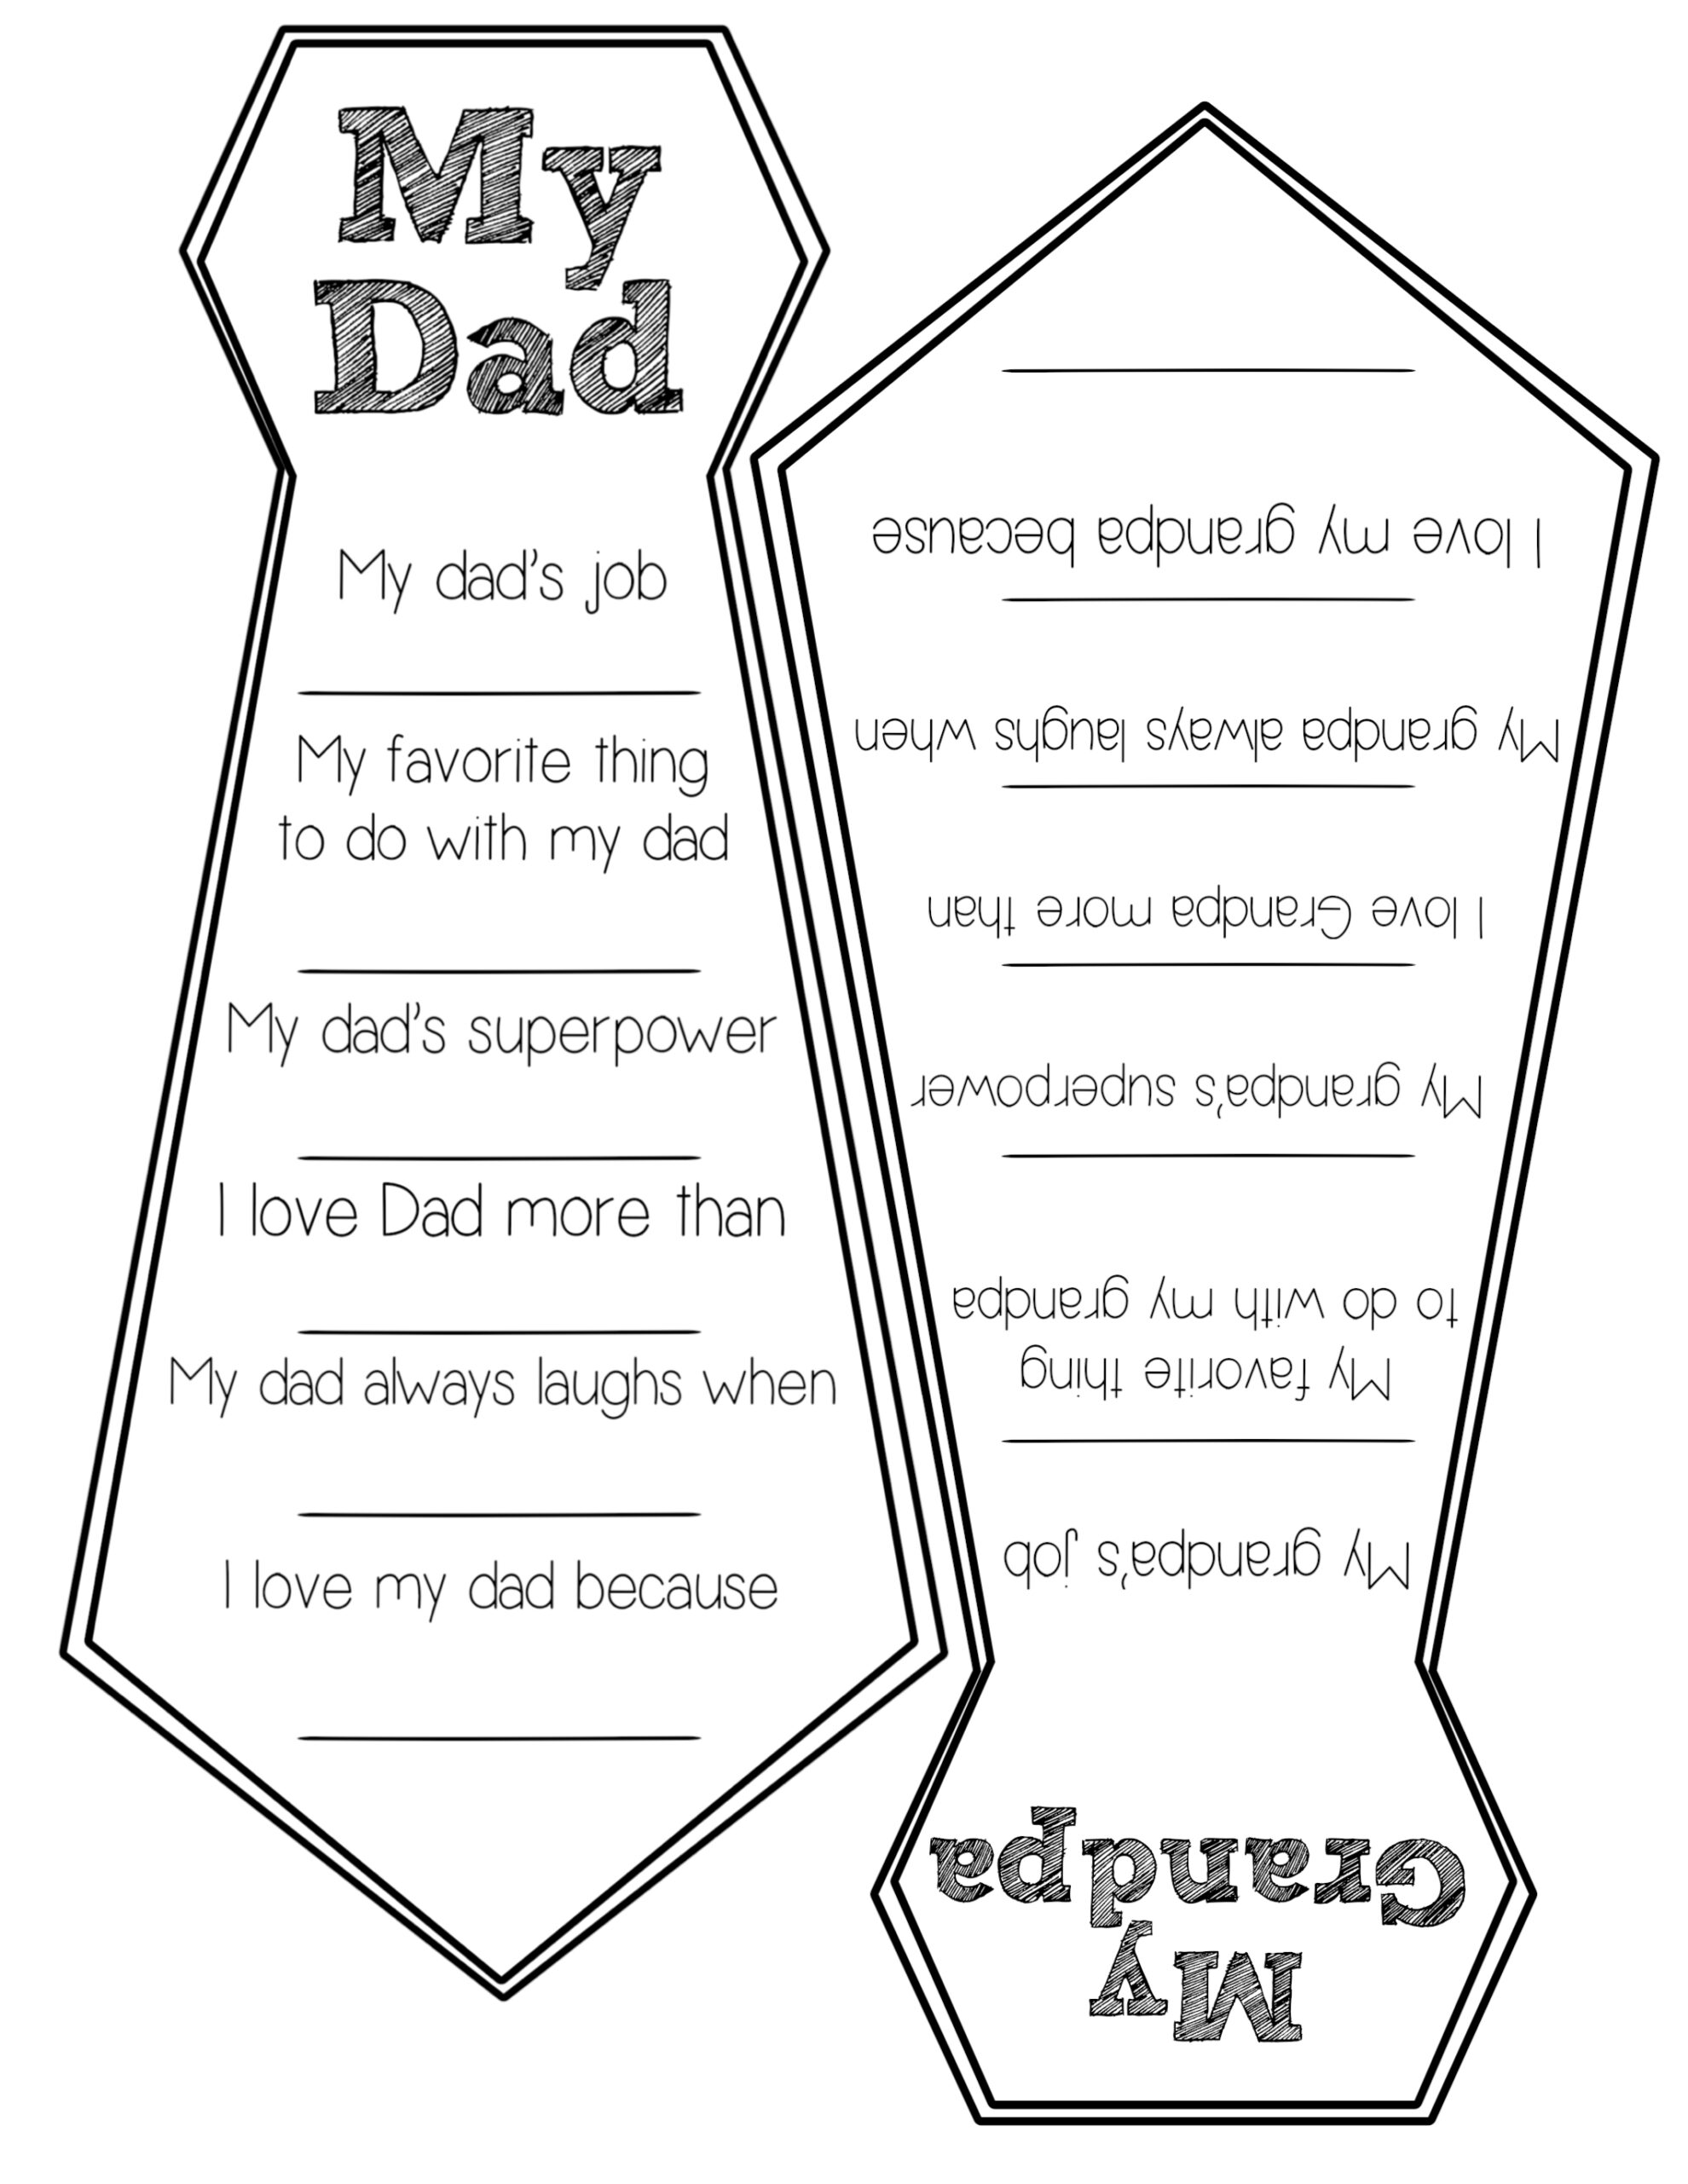 father-s-day-printable-crafts